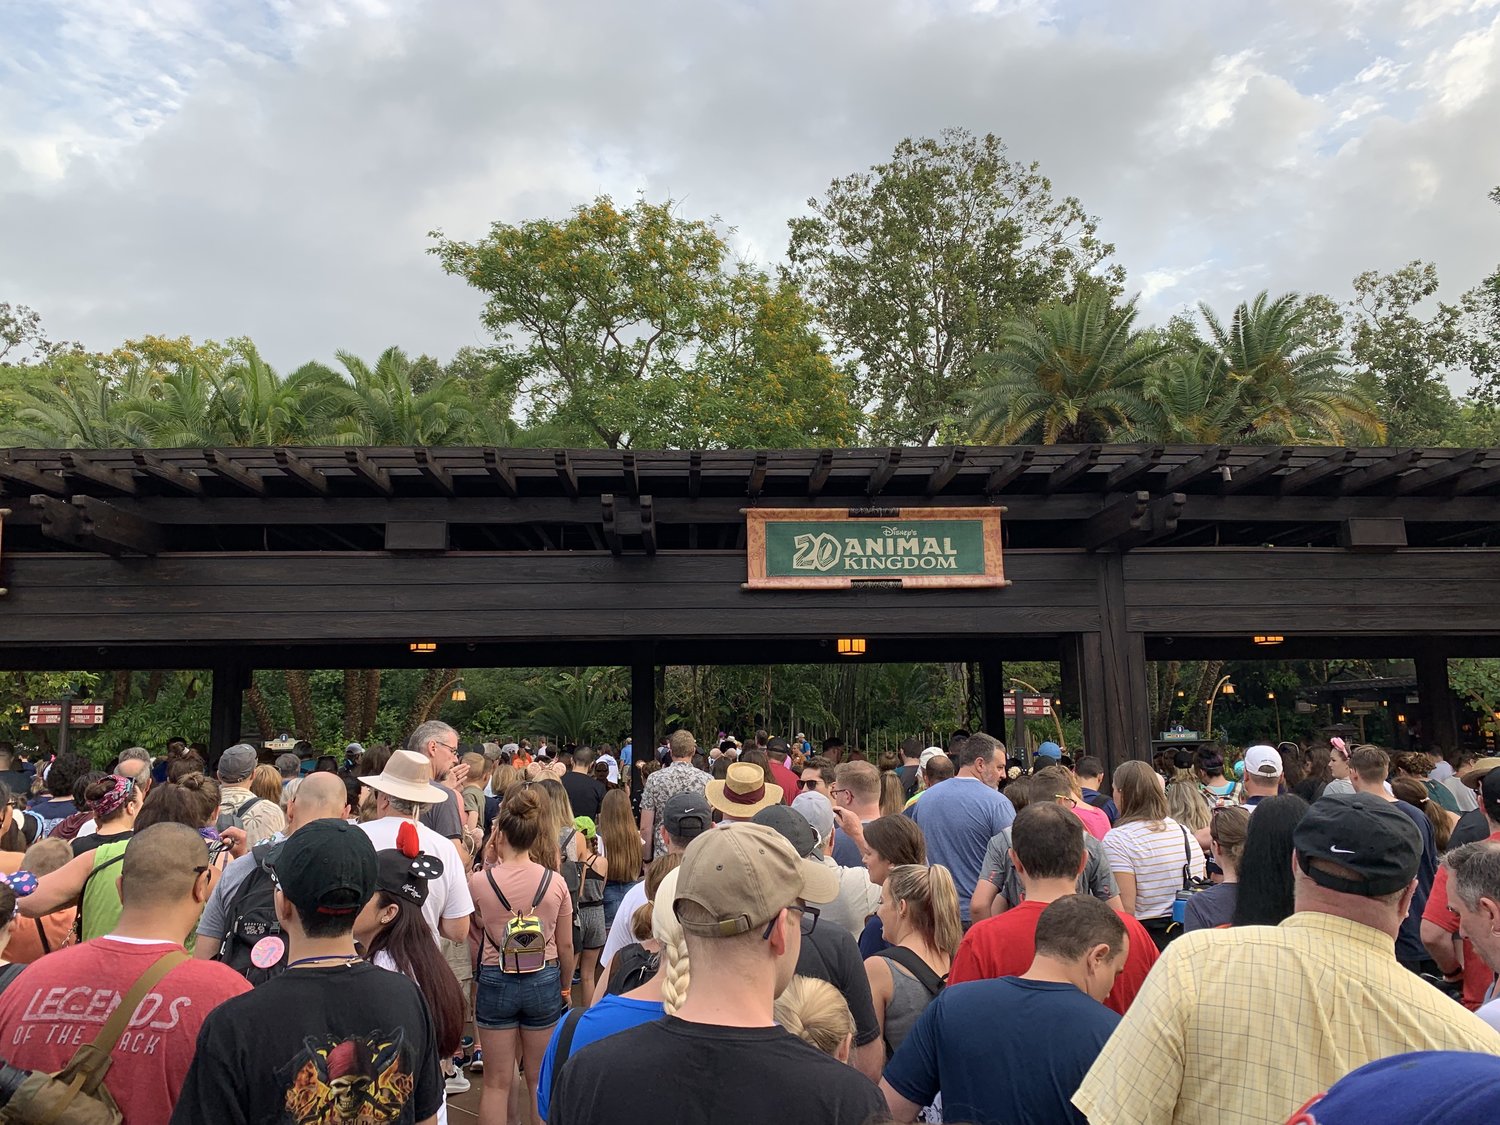 https://www.mousehacking.com/blog/disney-world-early-summer-2019-trip-report-part-3